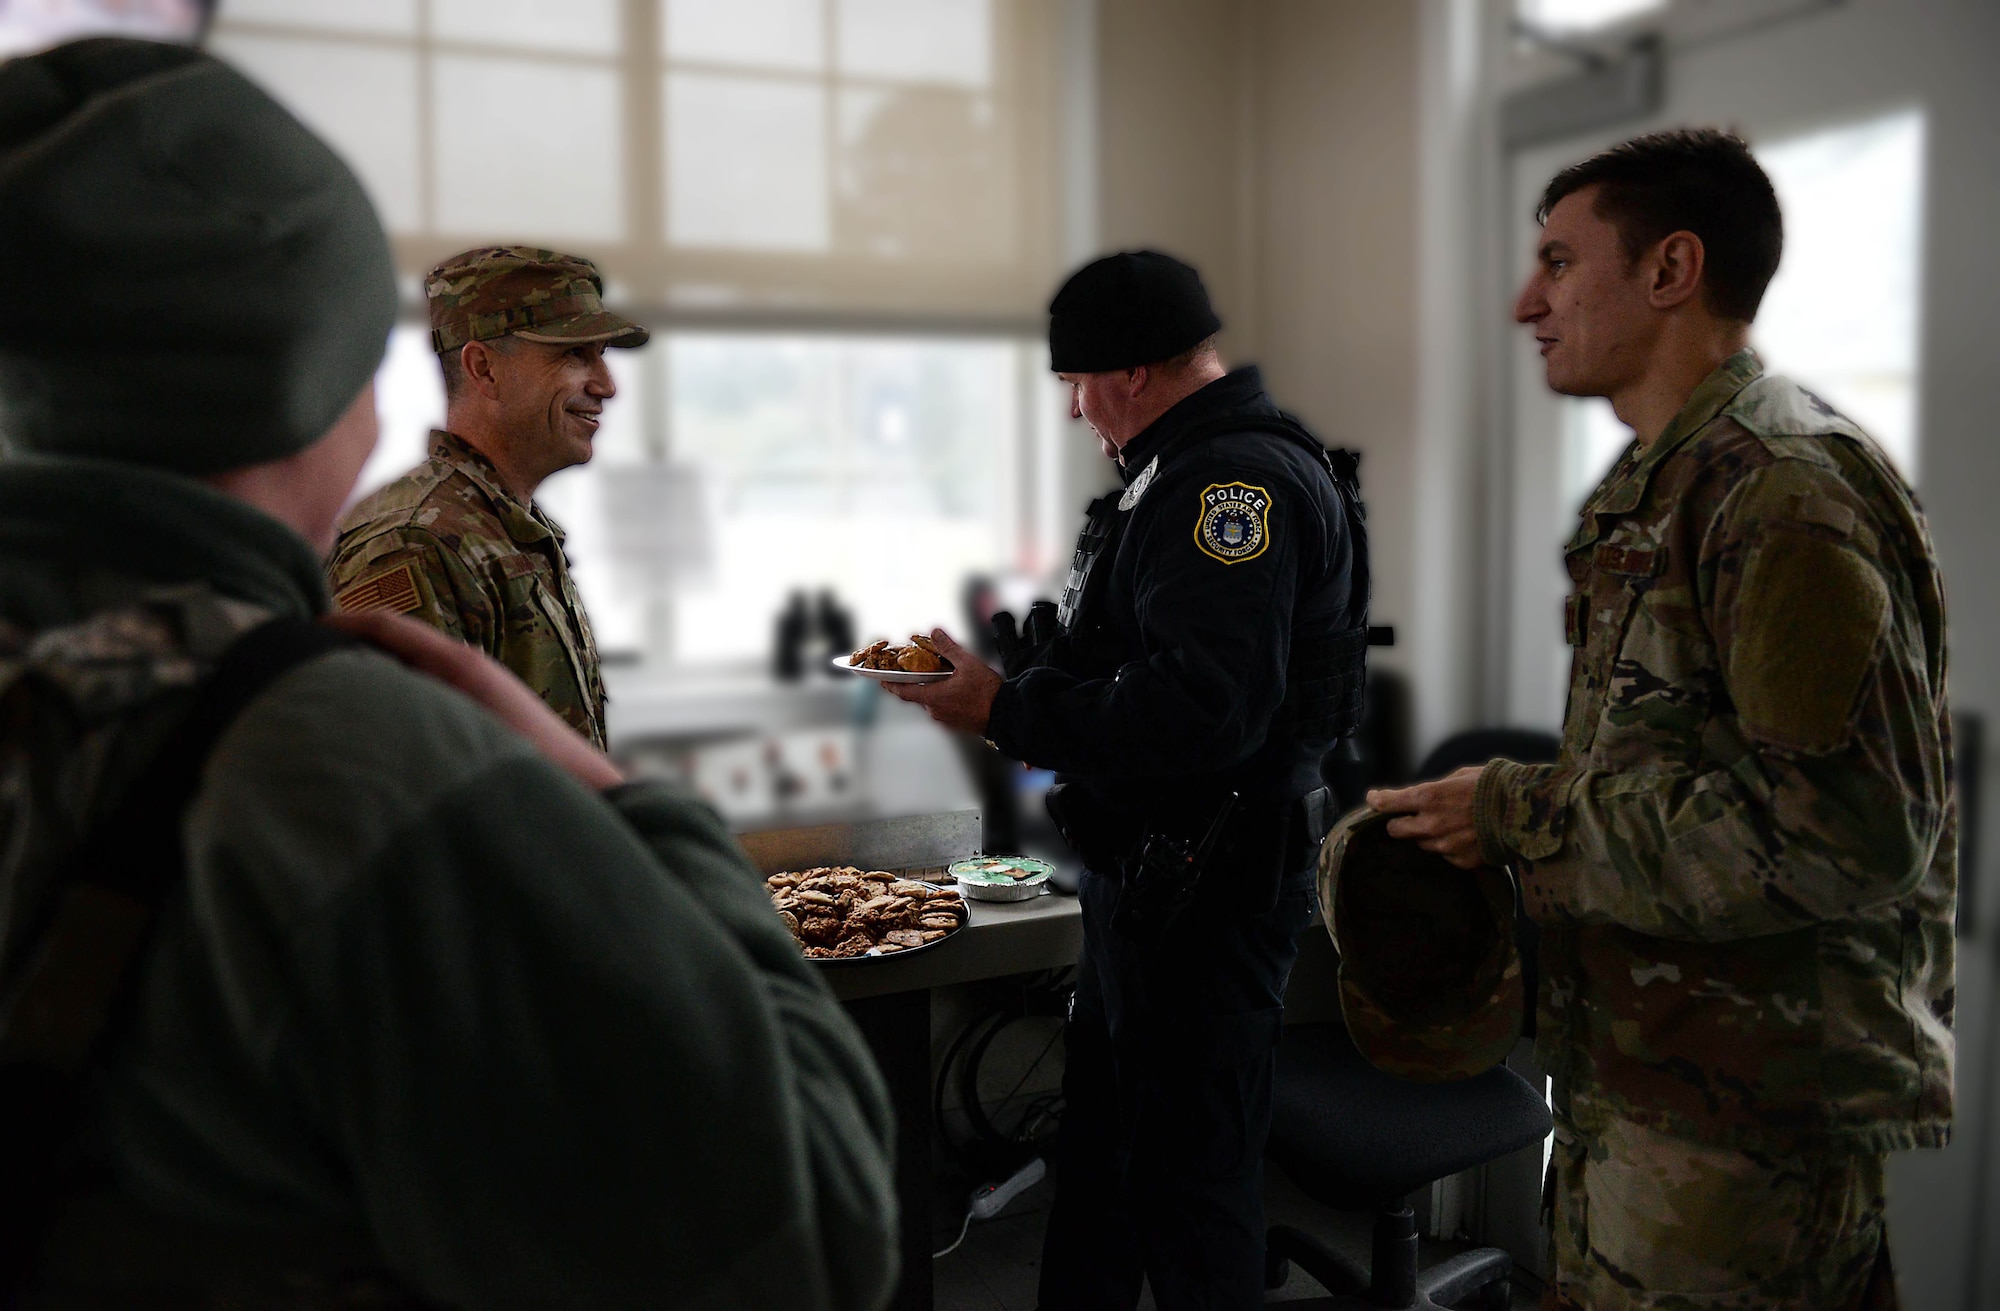 Airmen from the 14th Security Forces Squadron receive cookies from volunteers during the Columbus Spouses Club Cookie Drive Dec. 17, 2019, on Columbus Air Force Base, Miss. Donations were provided by the base populace as well as Zachary’s, Chick-fil-A, McAlister’s Deli, Sweet Peppers Deli, and Lost Pizza Co. In addition, Zachary’s provided as an off-base drop-off location for local volunteers to donate cookies for the drive. (U.S. Air Force photo by Airman 1st Class Hannah Bean)